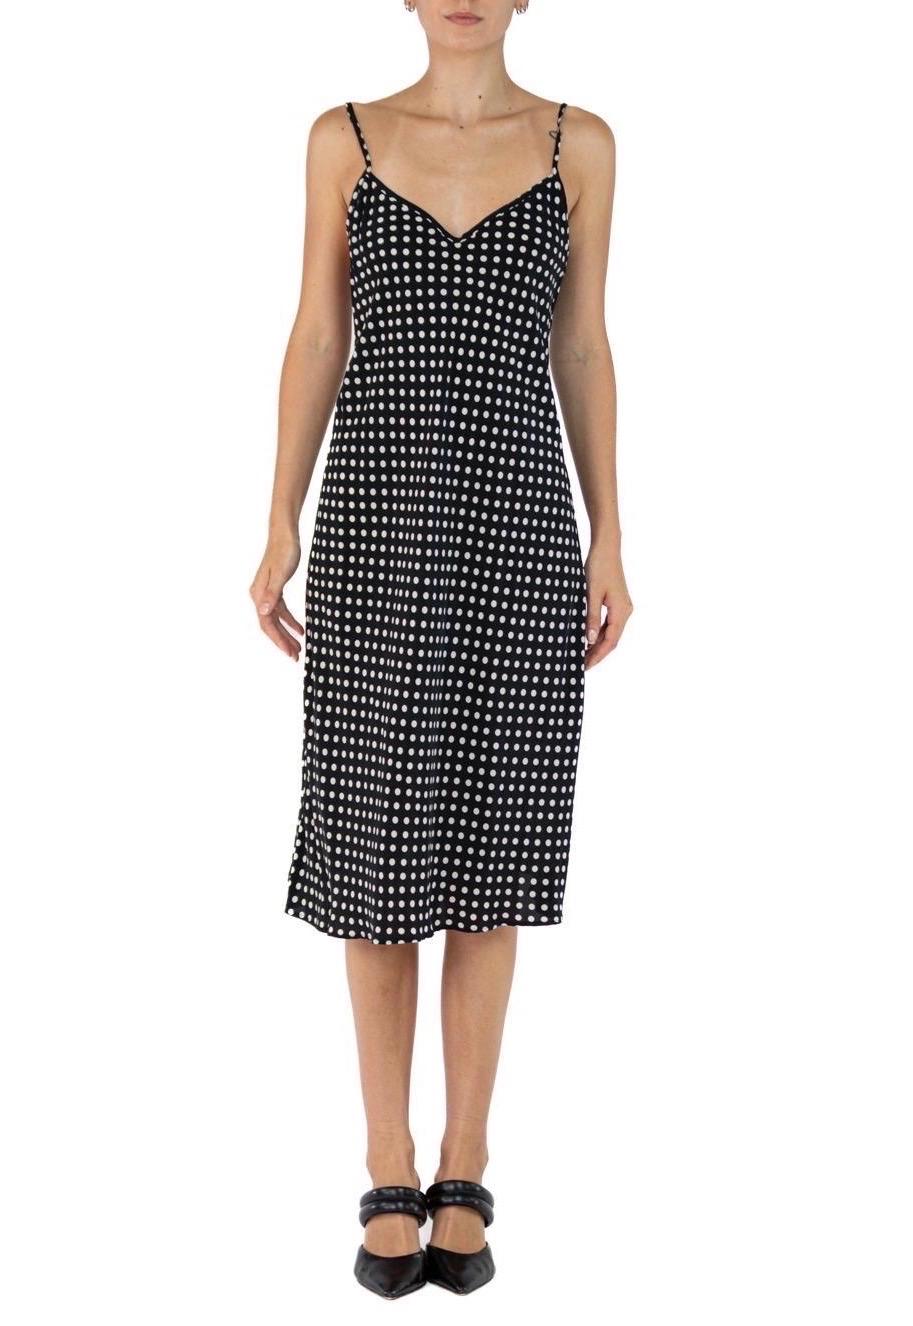 Morphew Collection Black & White Polka Dot Cold Rayon Bias  Slip Dress Master Medium
MORPHEW COLLECTION is made entirely by hand in our NYC Ateliér of rare antique materials sourced from around the globe. Our sustainable vintage materials represent